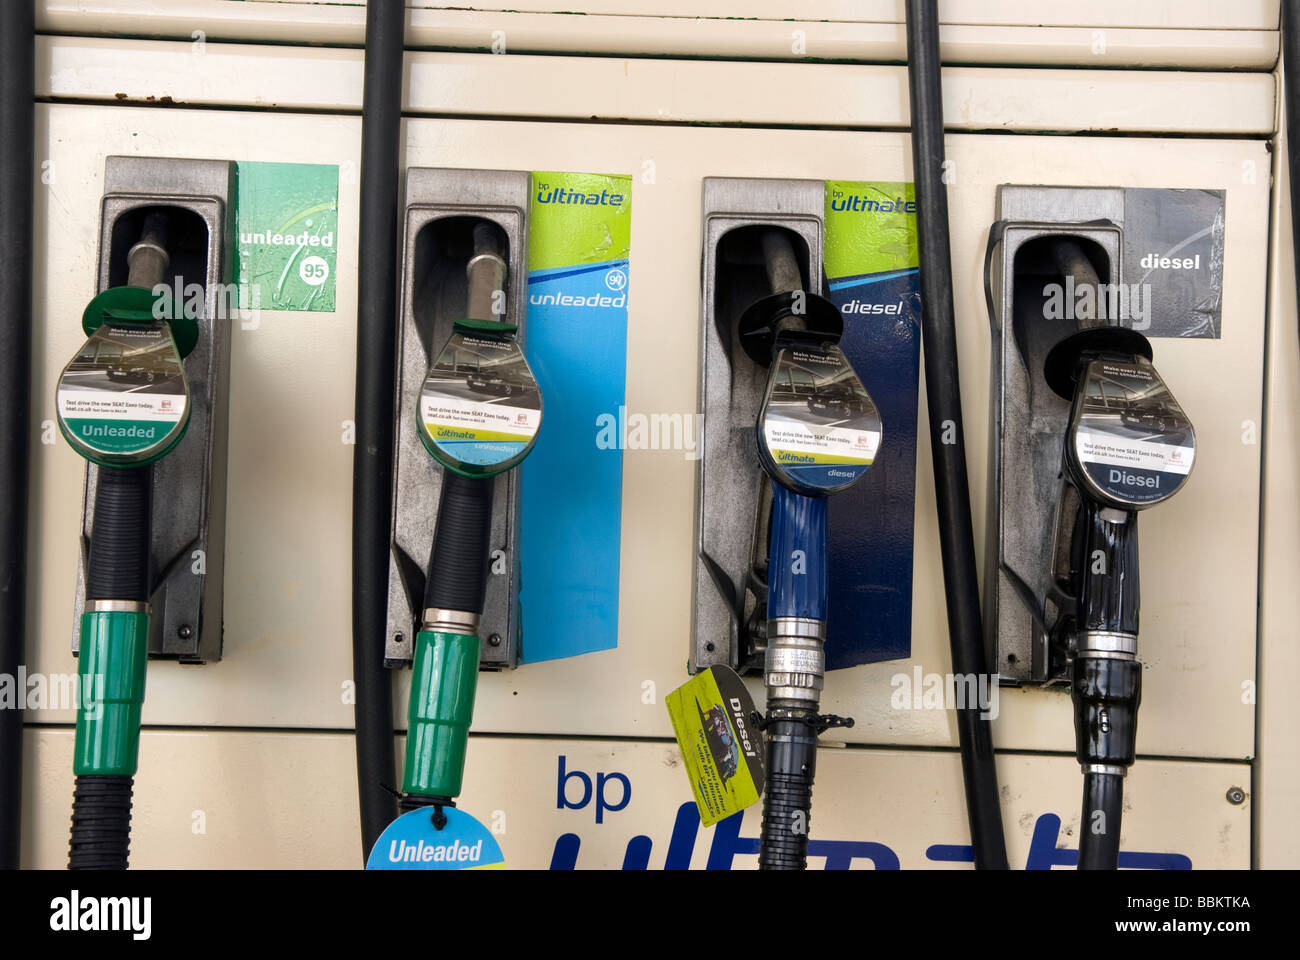 Petrol pumps at BP filling station showing diesel, unleaded fuel types, Toddington Services, UK. Stock Photo